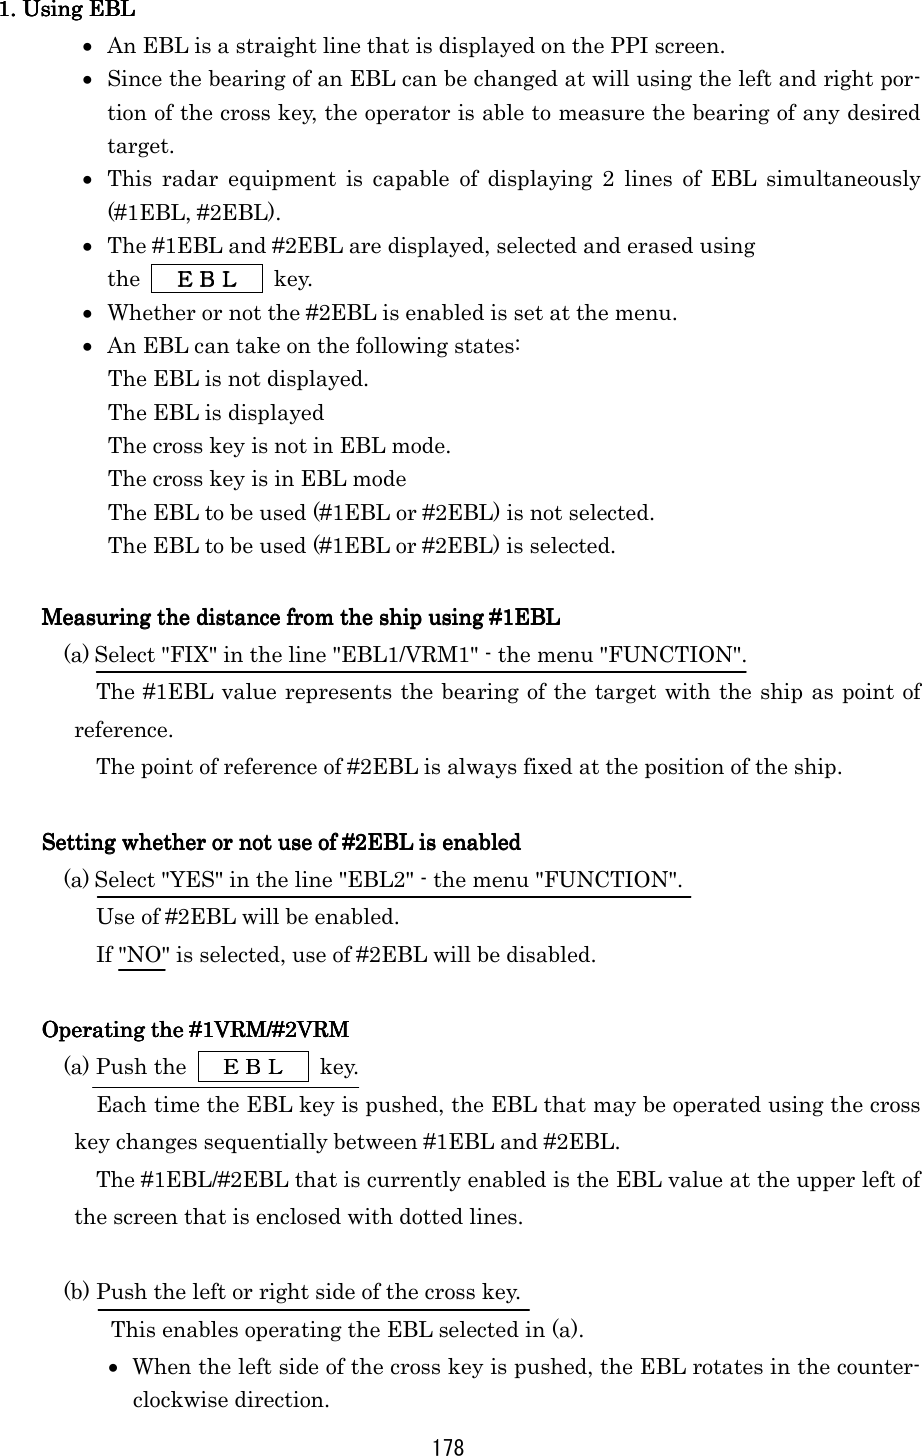 178 1. Using EBL1. Using EBL1. Using EBL1. Using EBL    •  An EBL is a straight line that is displayed on the PPI screen. •  Since the bearing of an EBL can be changed at will using the left and right por-tion of the cross key, the operator is able to measure the bearing of any desired target. •  This radar equipment is capable of displaying 2 lines of EBL simultaneously (#1EBL, #2EBL). •  The #1EBL and #2EBL are displayed, selected and erased using   the      ＥＢＬＥＢＬＥＢＬＥＢＬ     key. •  Whether or not the #2EBL is enabled is set at the menu. •  An EBL can take on the following states: The EBL is not displayed. The EBL is displayed The cross key is not in EBL mode. The cross key is in EBL mode The EBL to be used (#1EBL or #2EBL) is not selected. The EBL to be used (#1EBL or #2EBL) is selected.  Measuring the distance from the ship using #1EBLMeasuring the distance from the ship using #1EBLMeasuring the distance from the ship using #1EBLMeasuring the distance from the ship using #1EBL    (a) Select &quot;FIX&quot; in the line &quot;EBL1/VRM1&quot; - the menu &quot;FUNCTION&quot;. The #1EBL value represents the bearing of the target with the ship as point of reference. The point of reference of #2EBL is always fixed at the position of the ship.  Setting whether or not use of #2EBL is enabledSetting whether or not use of #2EBL is enabledSetting whether or not use of #2EBL is enabledSetting whether or not use of #2EBL is enabled    (a) Select &quot;YES&quot; in the line &quot;EBL2&quot; - the menu &quot;FUNCTION&quot;. Use of #2EBL will be enabled. If &quot;NO&quot; is selected, use of #2EBL will be disabled.  Operating the #1VRM/#2VRMOperating the #1VRM/#2VRMOperating the #1VRM/#2VRMOperating the #1VRM/#2VRM    (a) Push the   ＥＢＬＥＢＬＥＢＬＥＢＬ  key. Each time the EBL key is pushed, the EBL that may be operated using the cross key changes sequentially between #1EBL and #2EBL. The #1EBL/#2EBL that is currently enabled is the EBL value at the upper left of the screen that is enclosed with dotted lines.  (b) Push the left or right side of the cross key. This enables operating the EBL selected in (a). •  When the left side of the cross key is pushed, the EBL rotates in the counter-clockwise direction. 